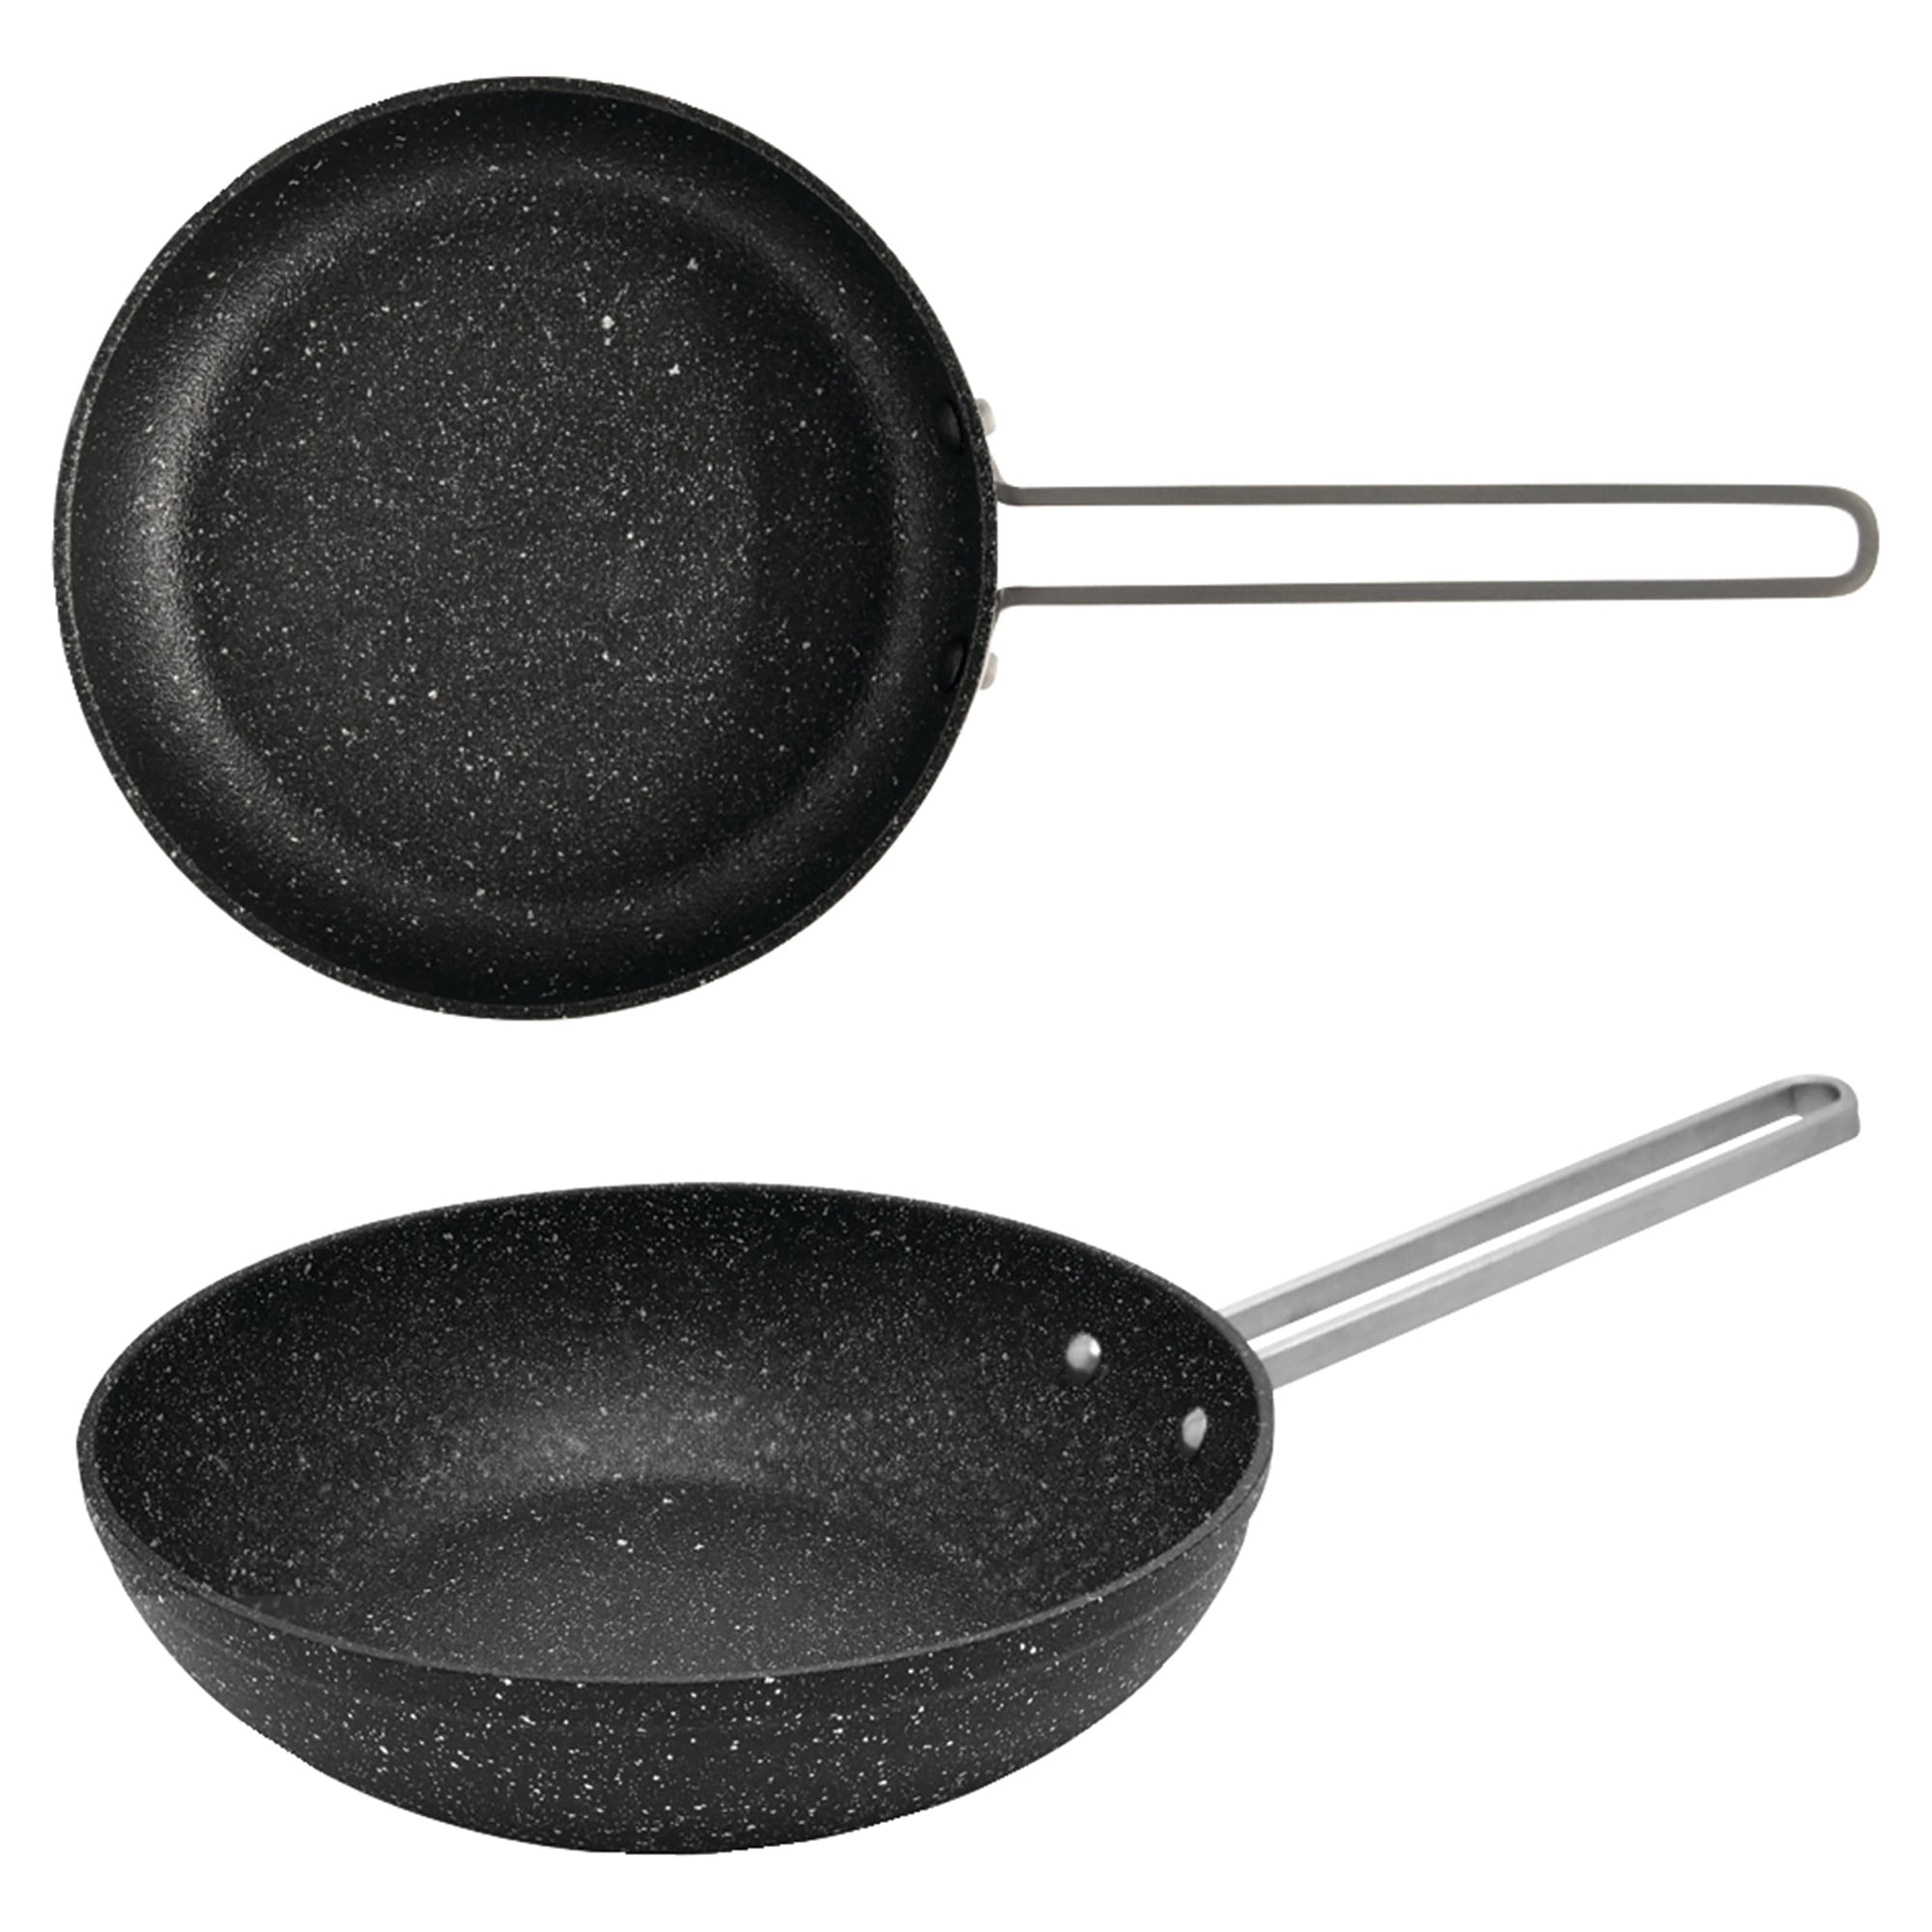 The Rock by Starfrit 7.08 Personal Wok Pan with Stainless Steel